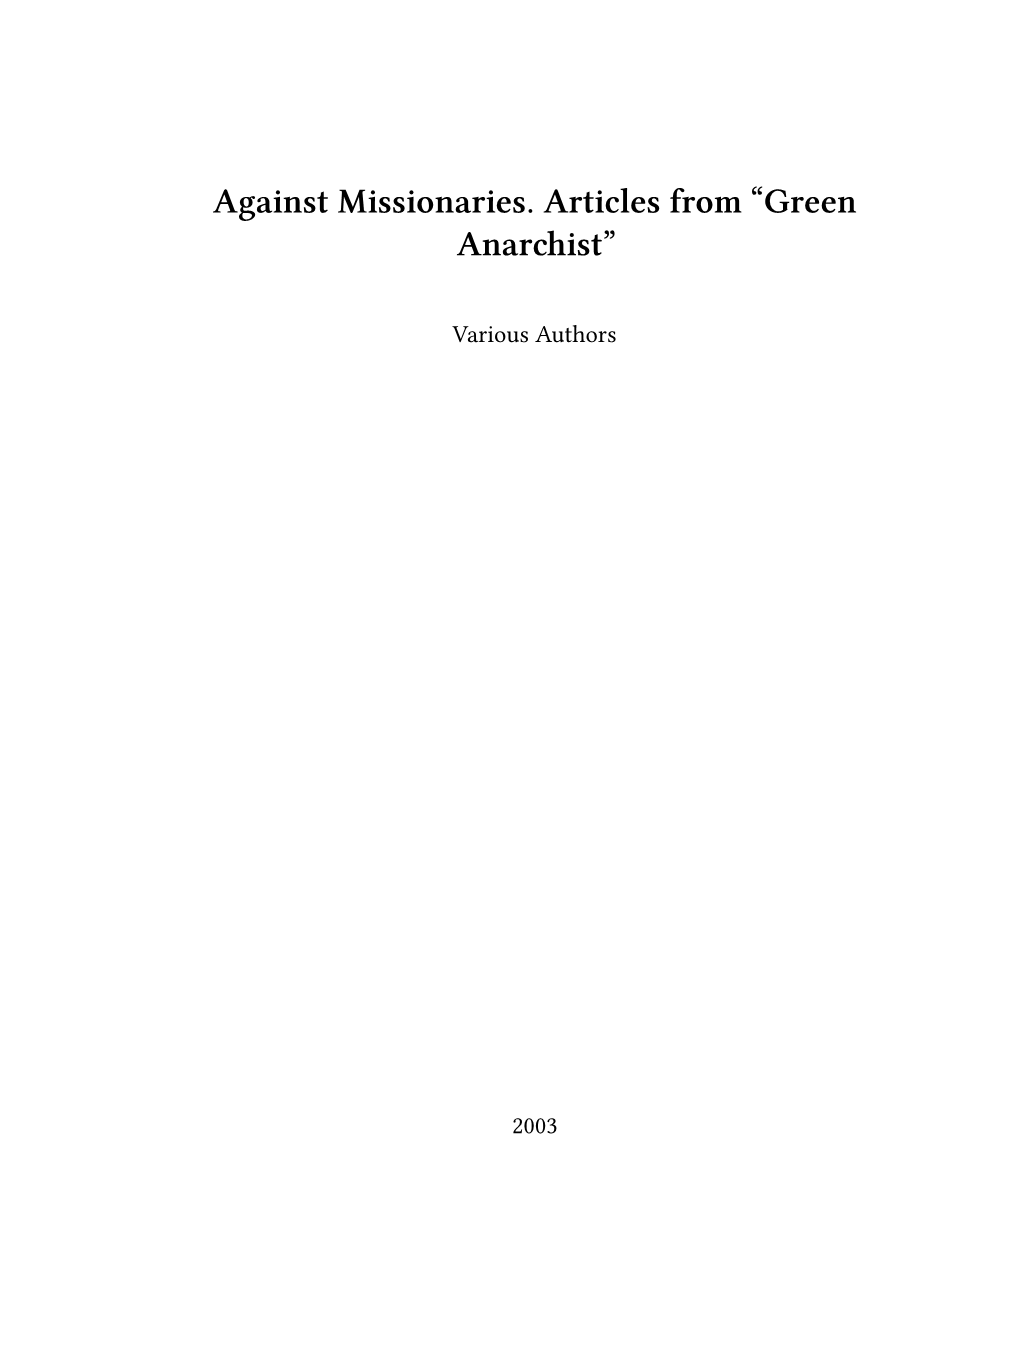 Against Missionaries. Articles from “Green Anarchist”